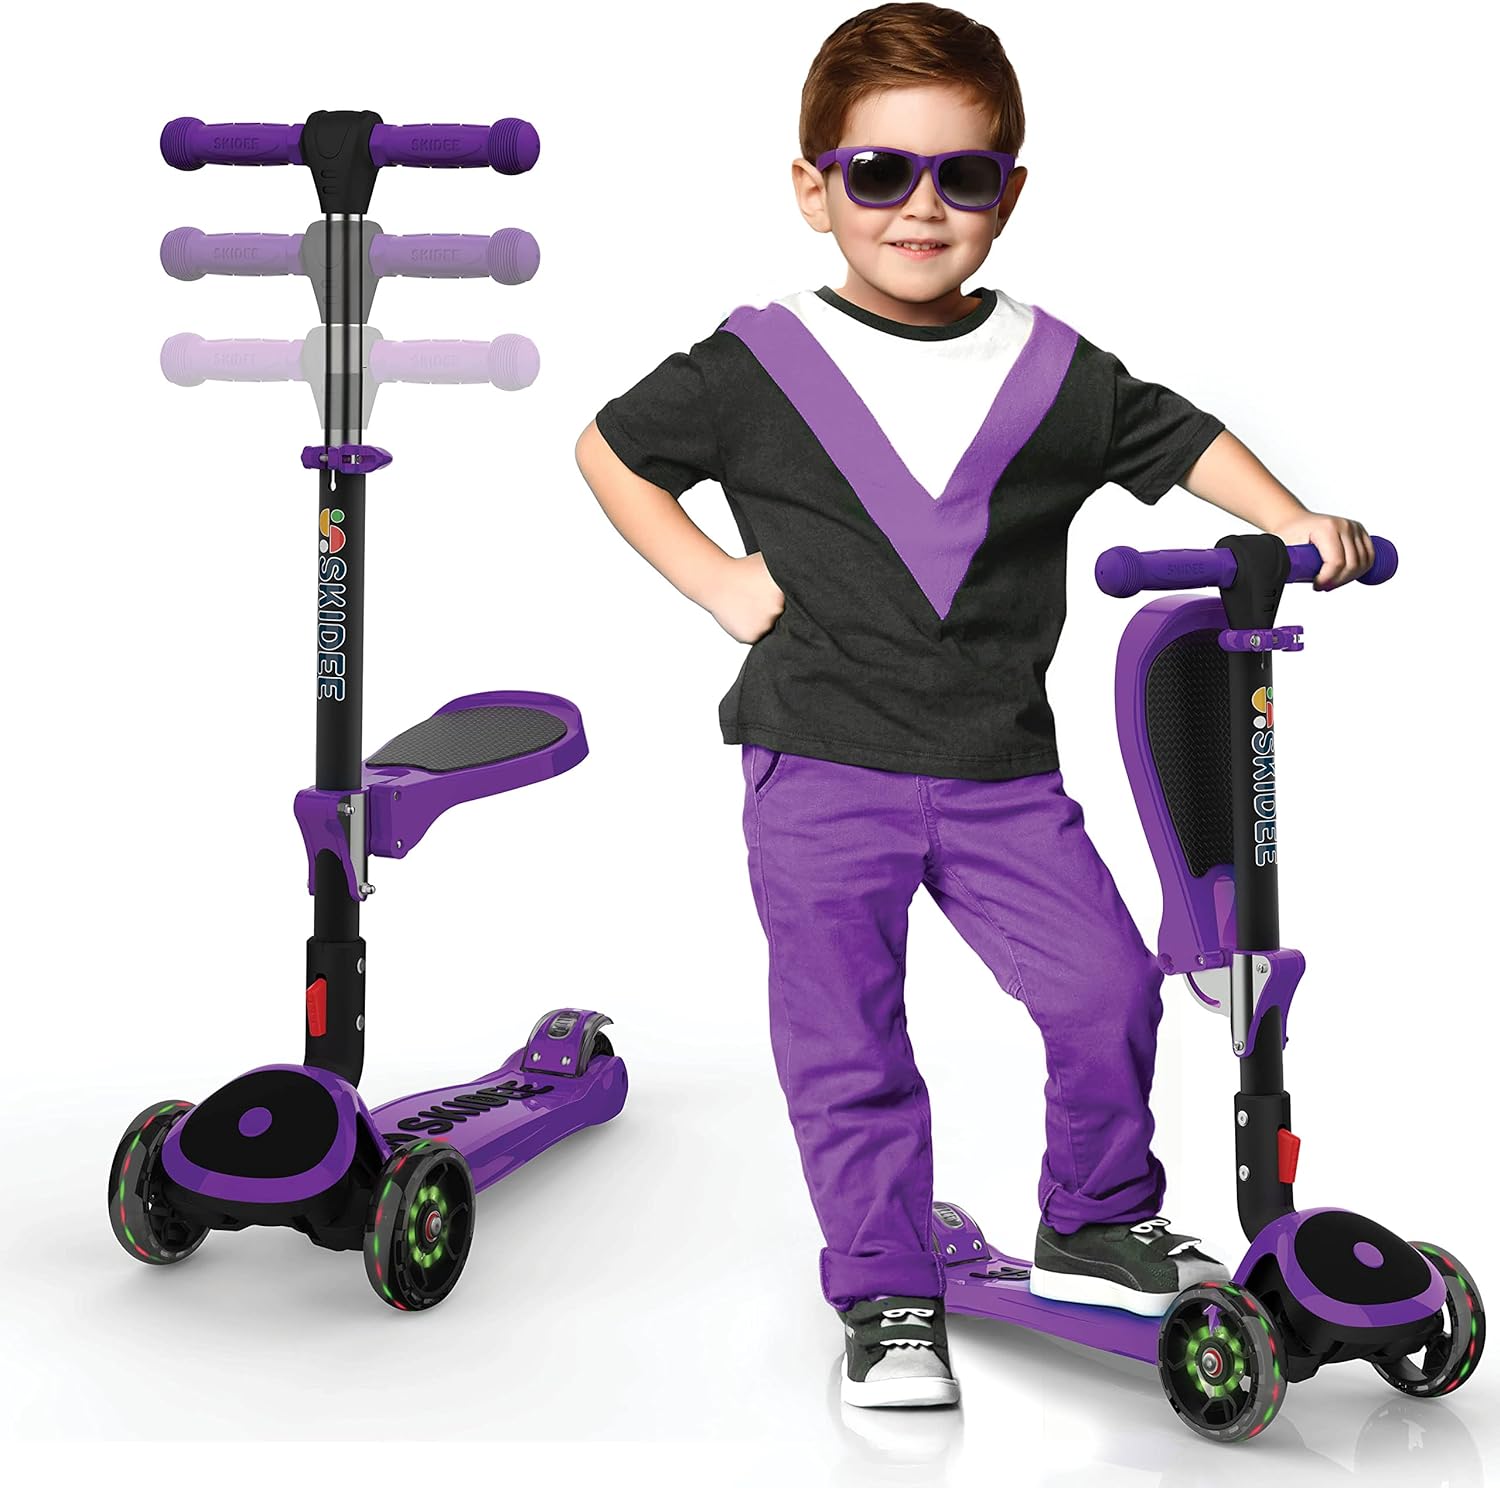 LED 3 Wheel Scooter Review